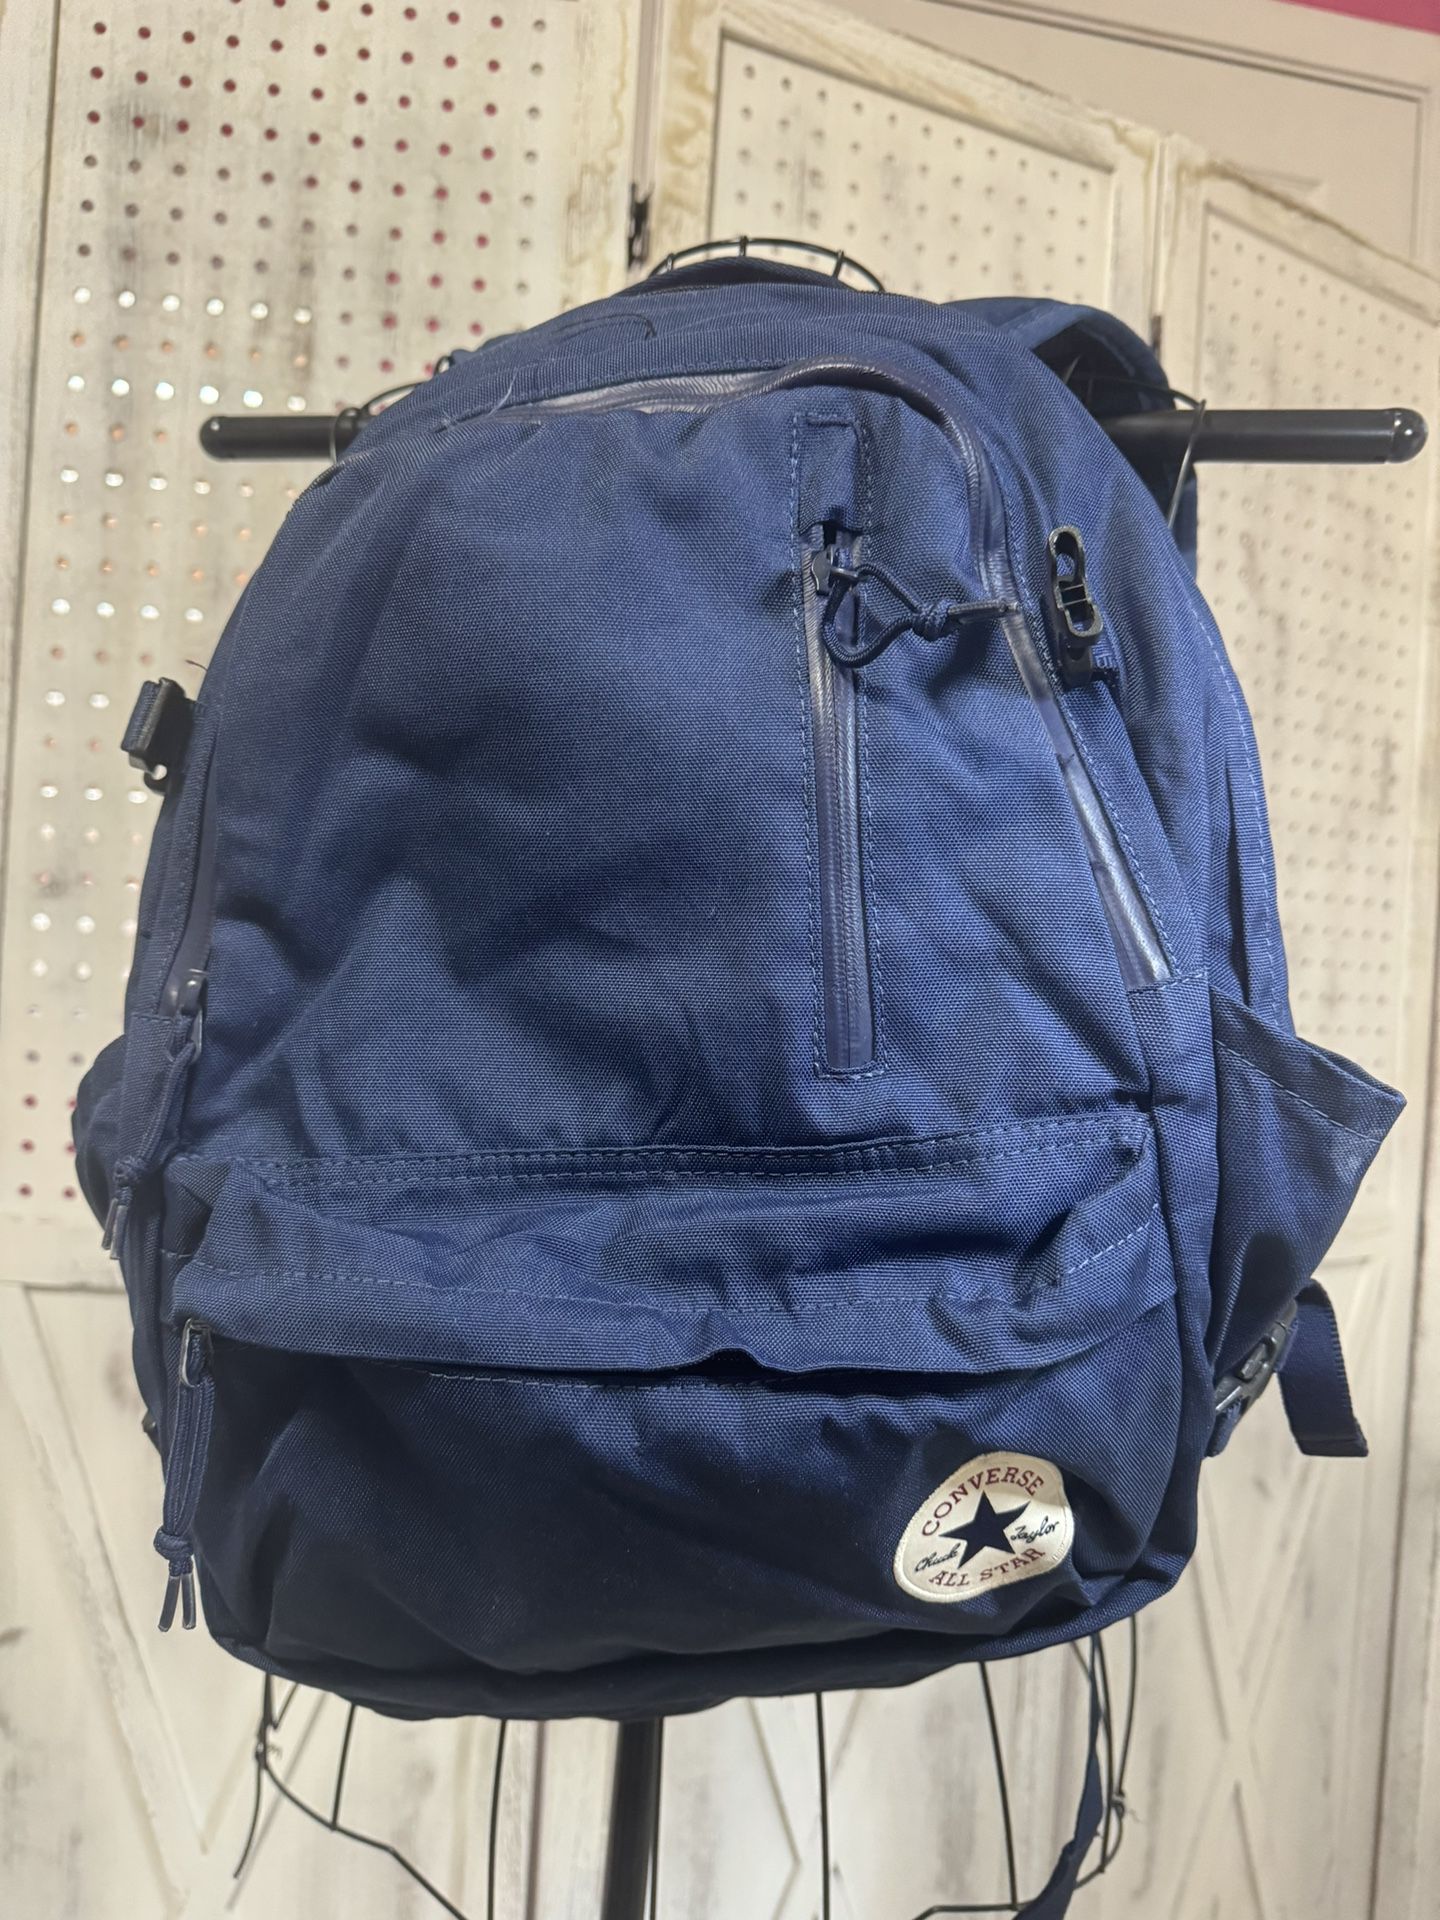 New without tags Converse backpack